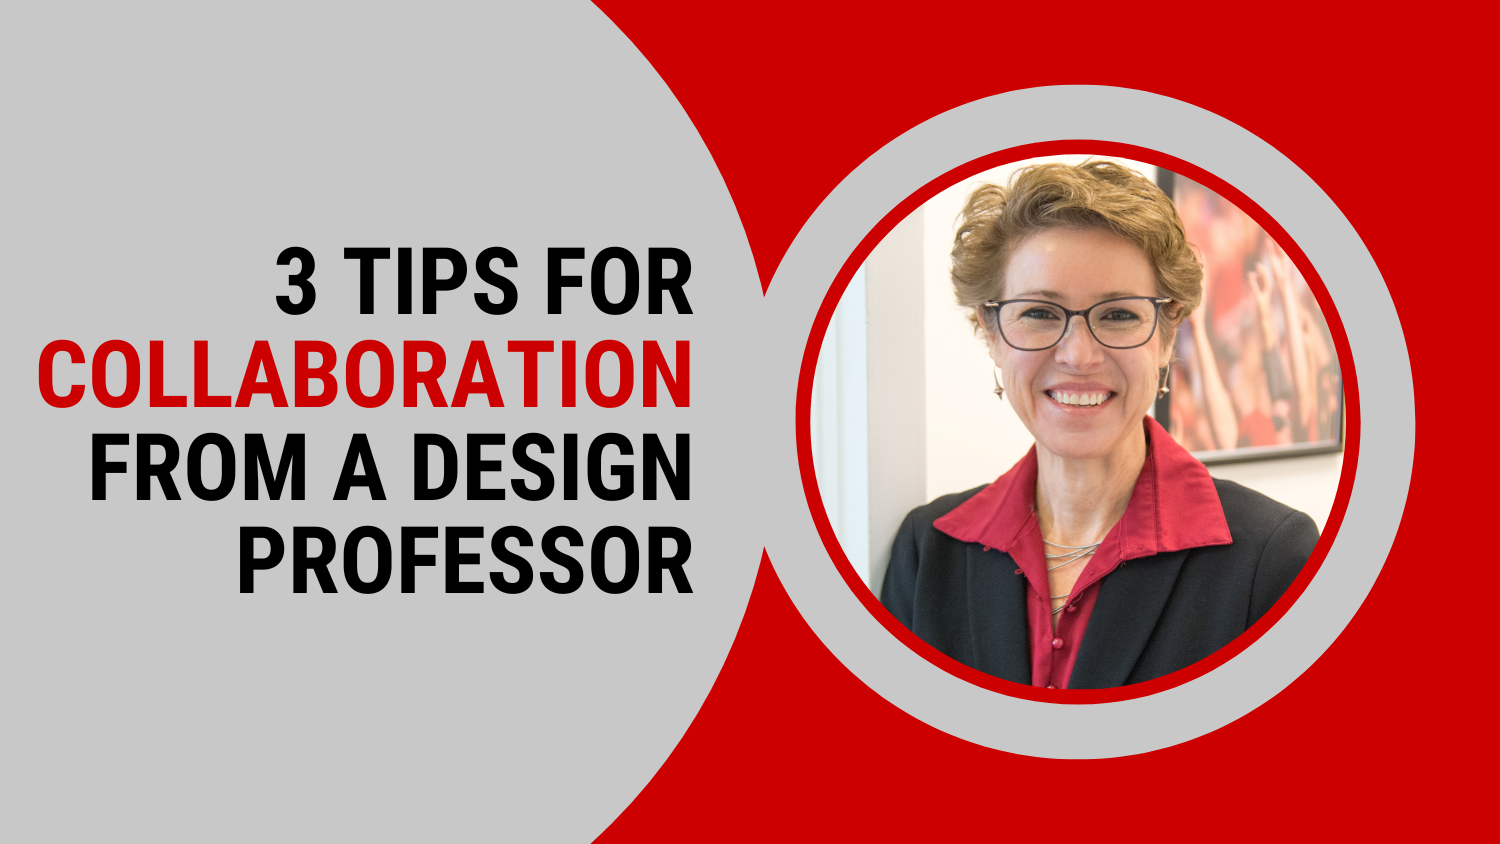 Sharon Joines: 3 Tips for collaboration from a design professor